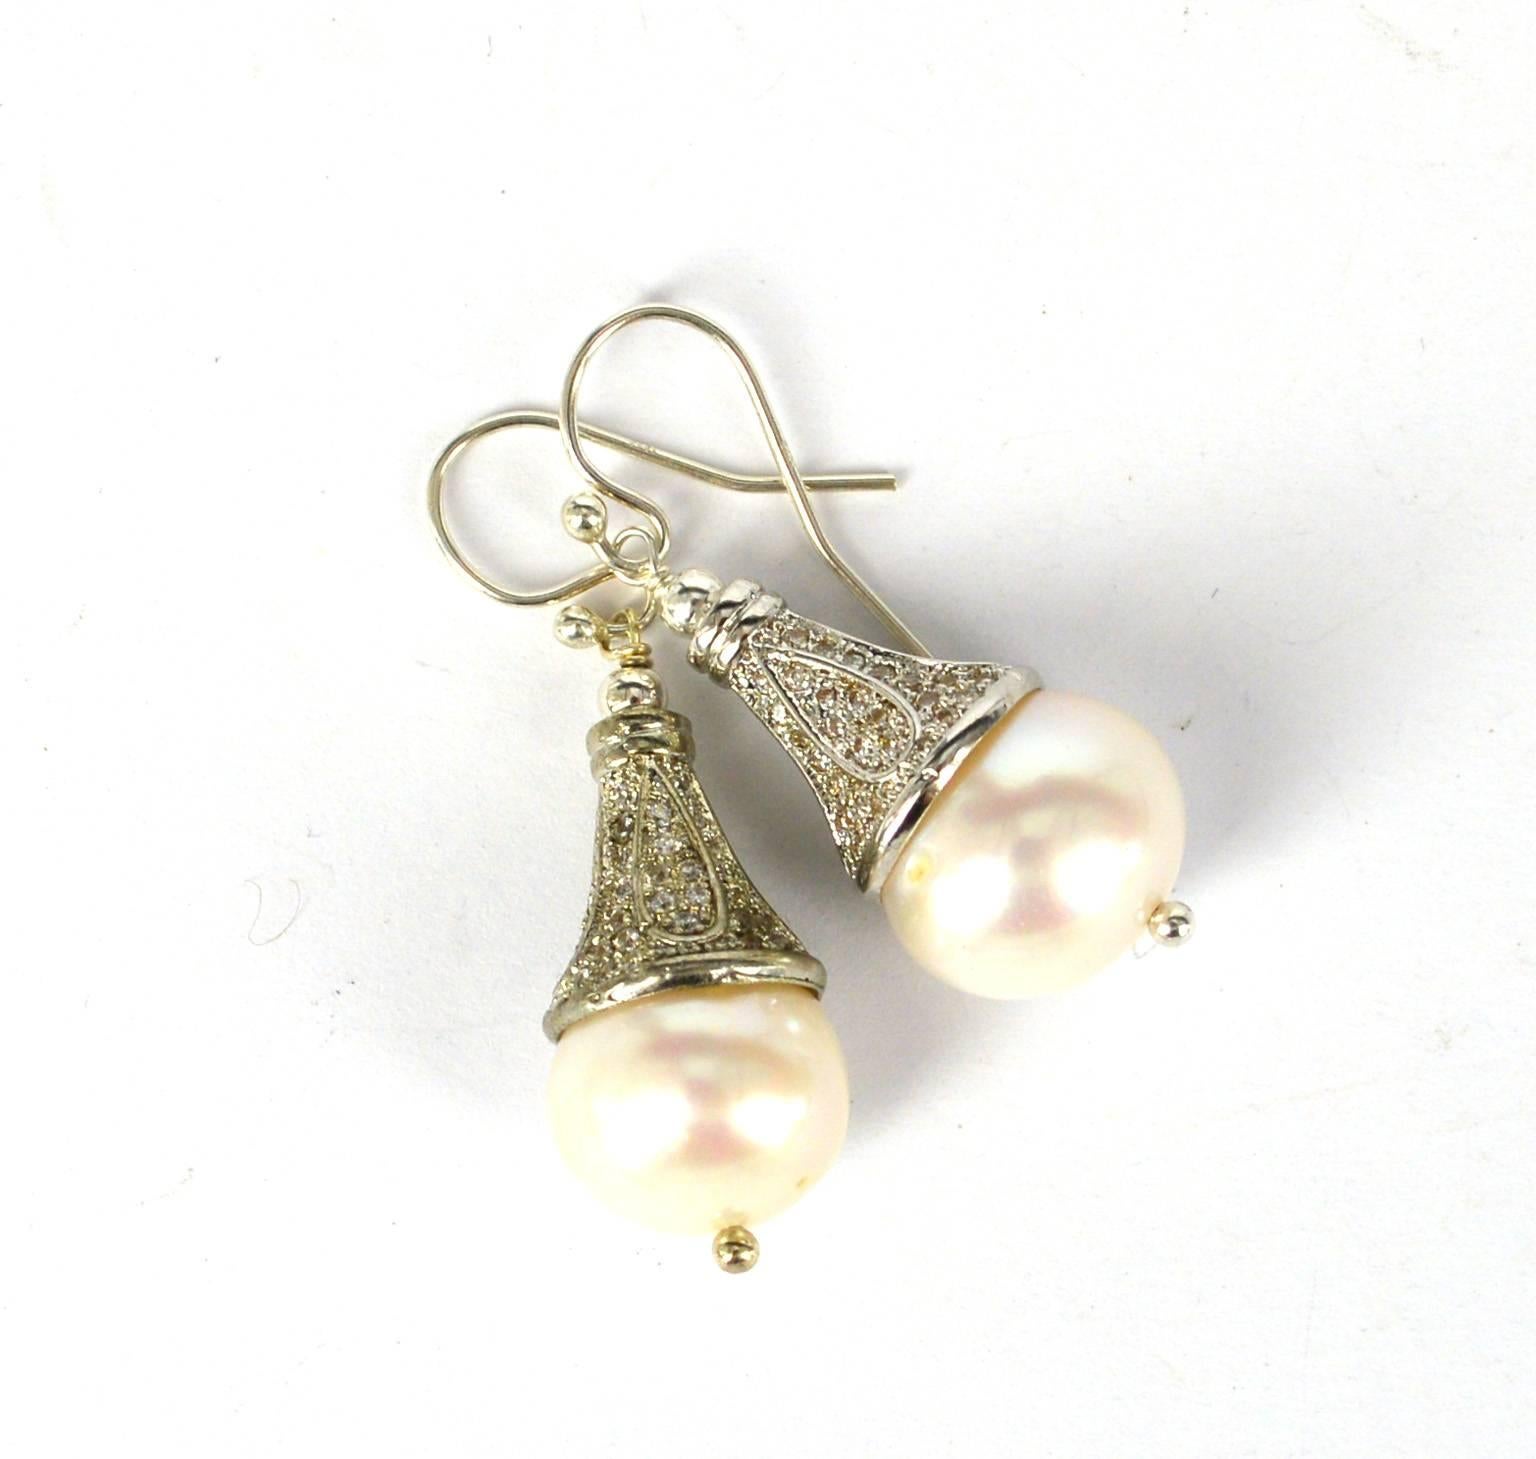 Victorian style natural pearl earrings. Rhodium plated CZ cone with an 11mm white fresh water pearl.
36mm drop earring 
Sterling Silver hook, headpin and 3mm bead.